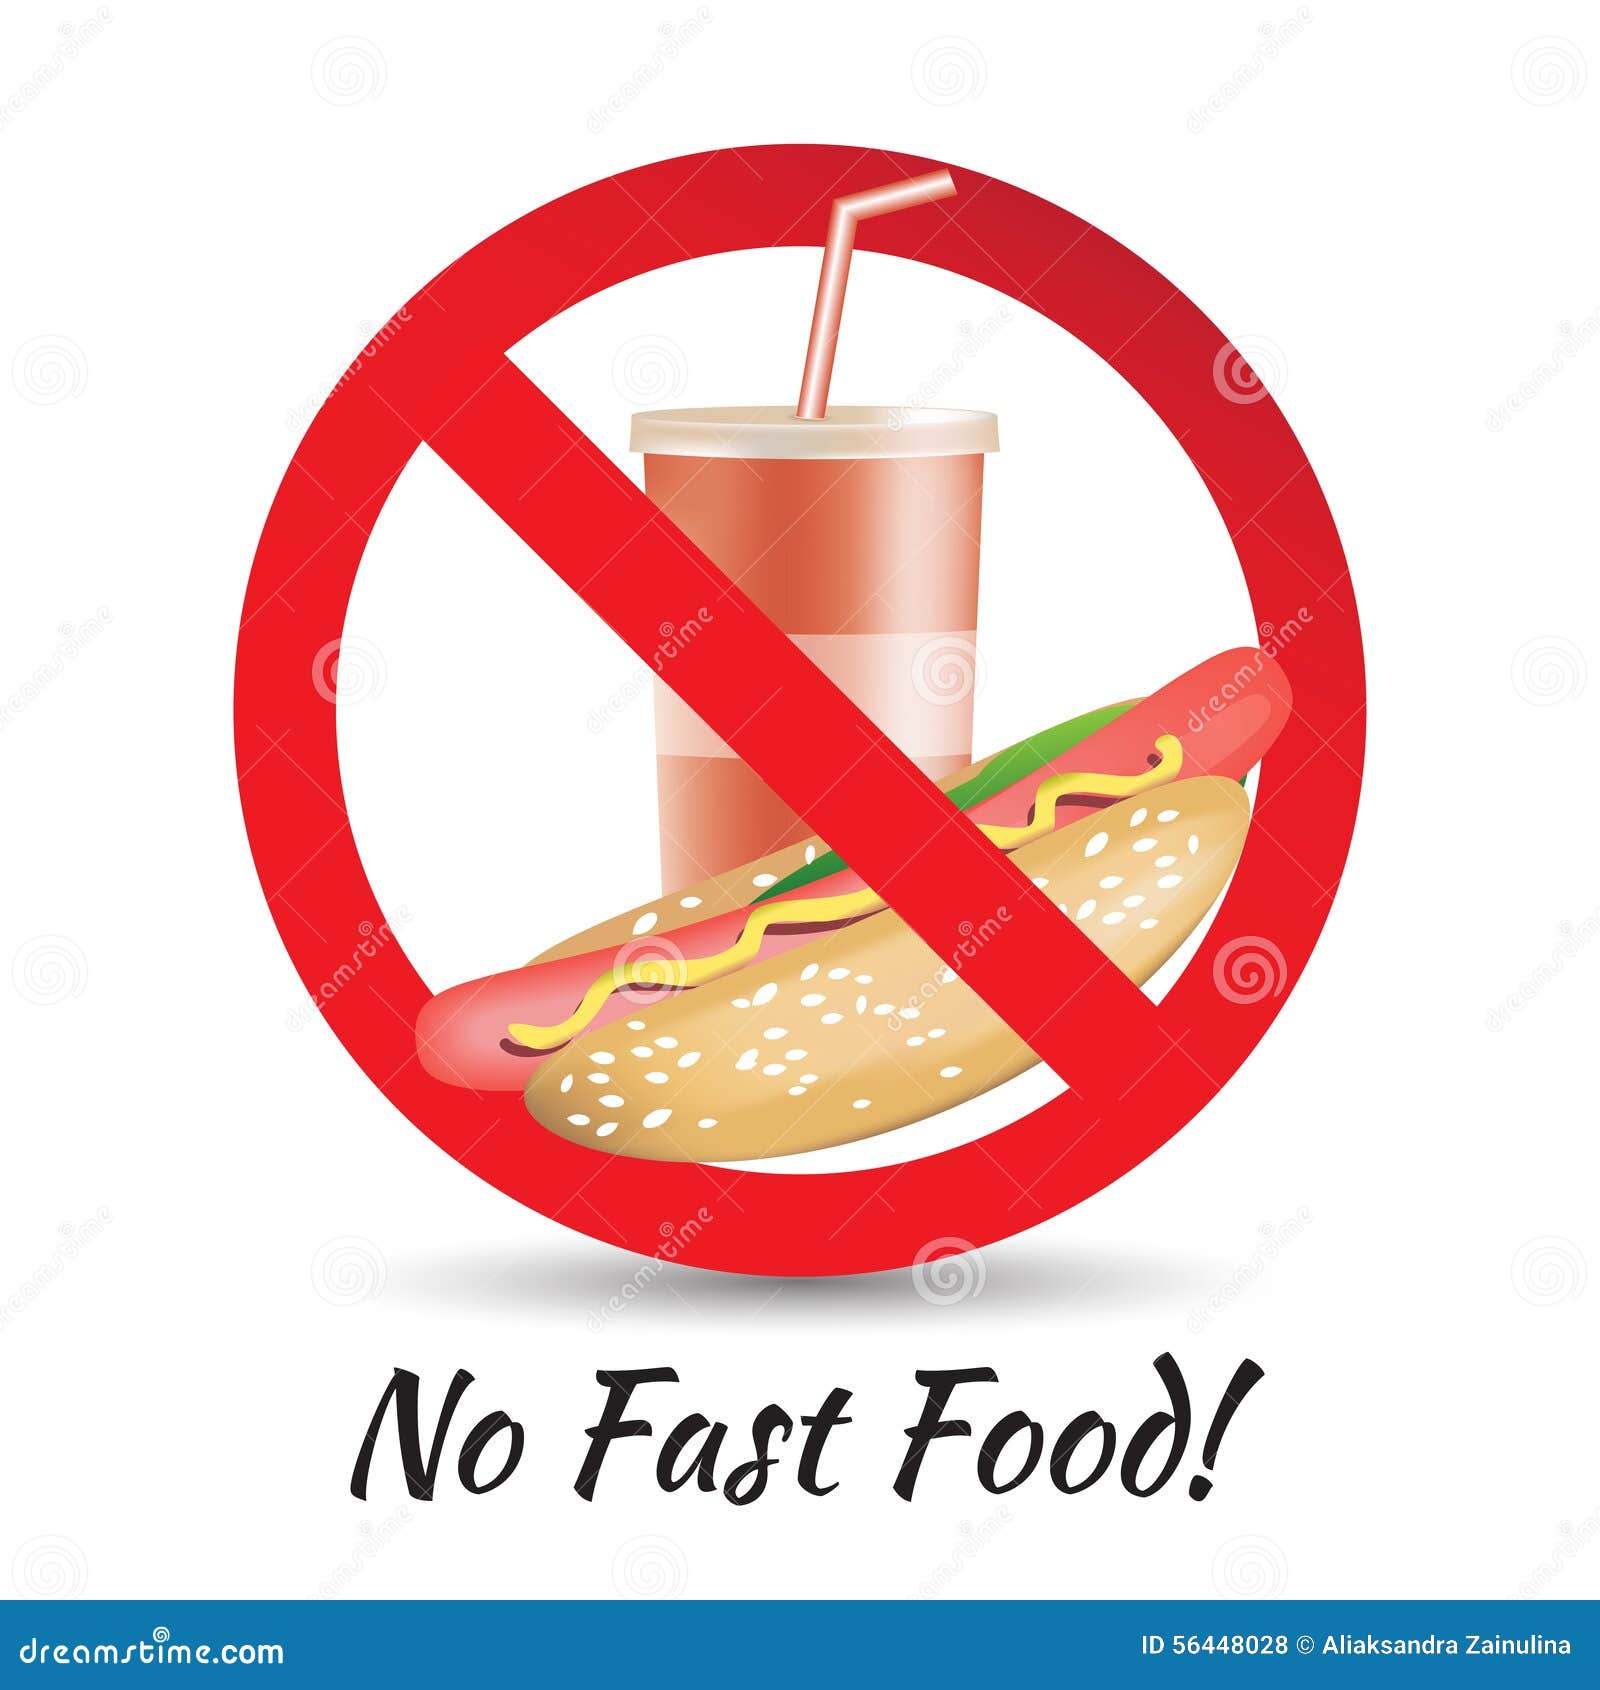 no fast food clipart - photo #43